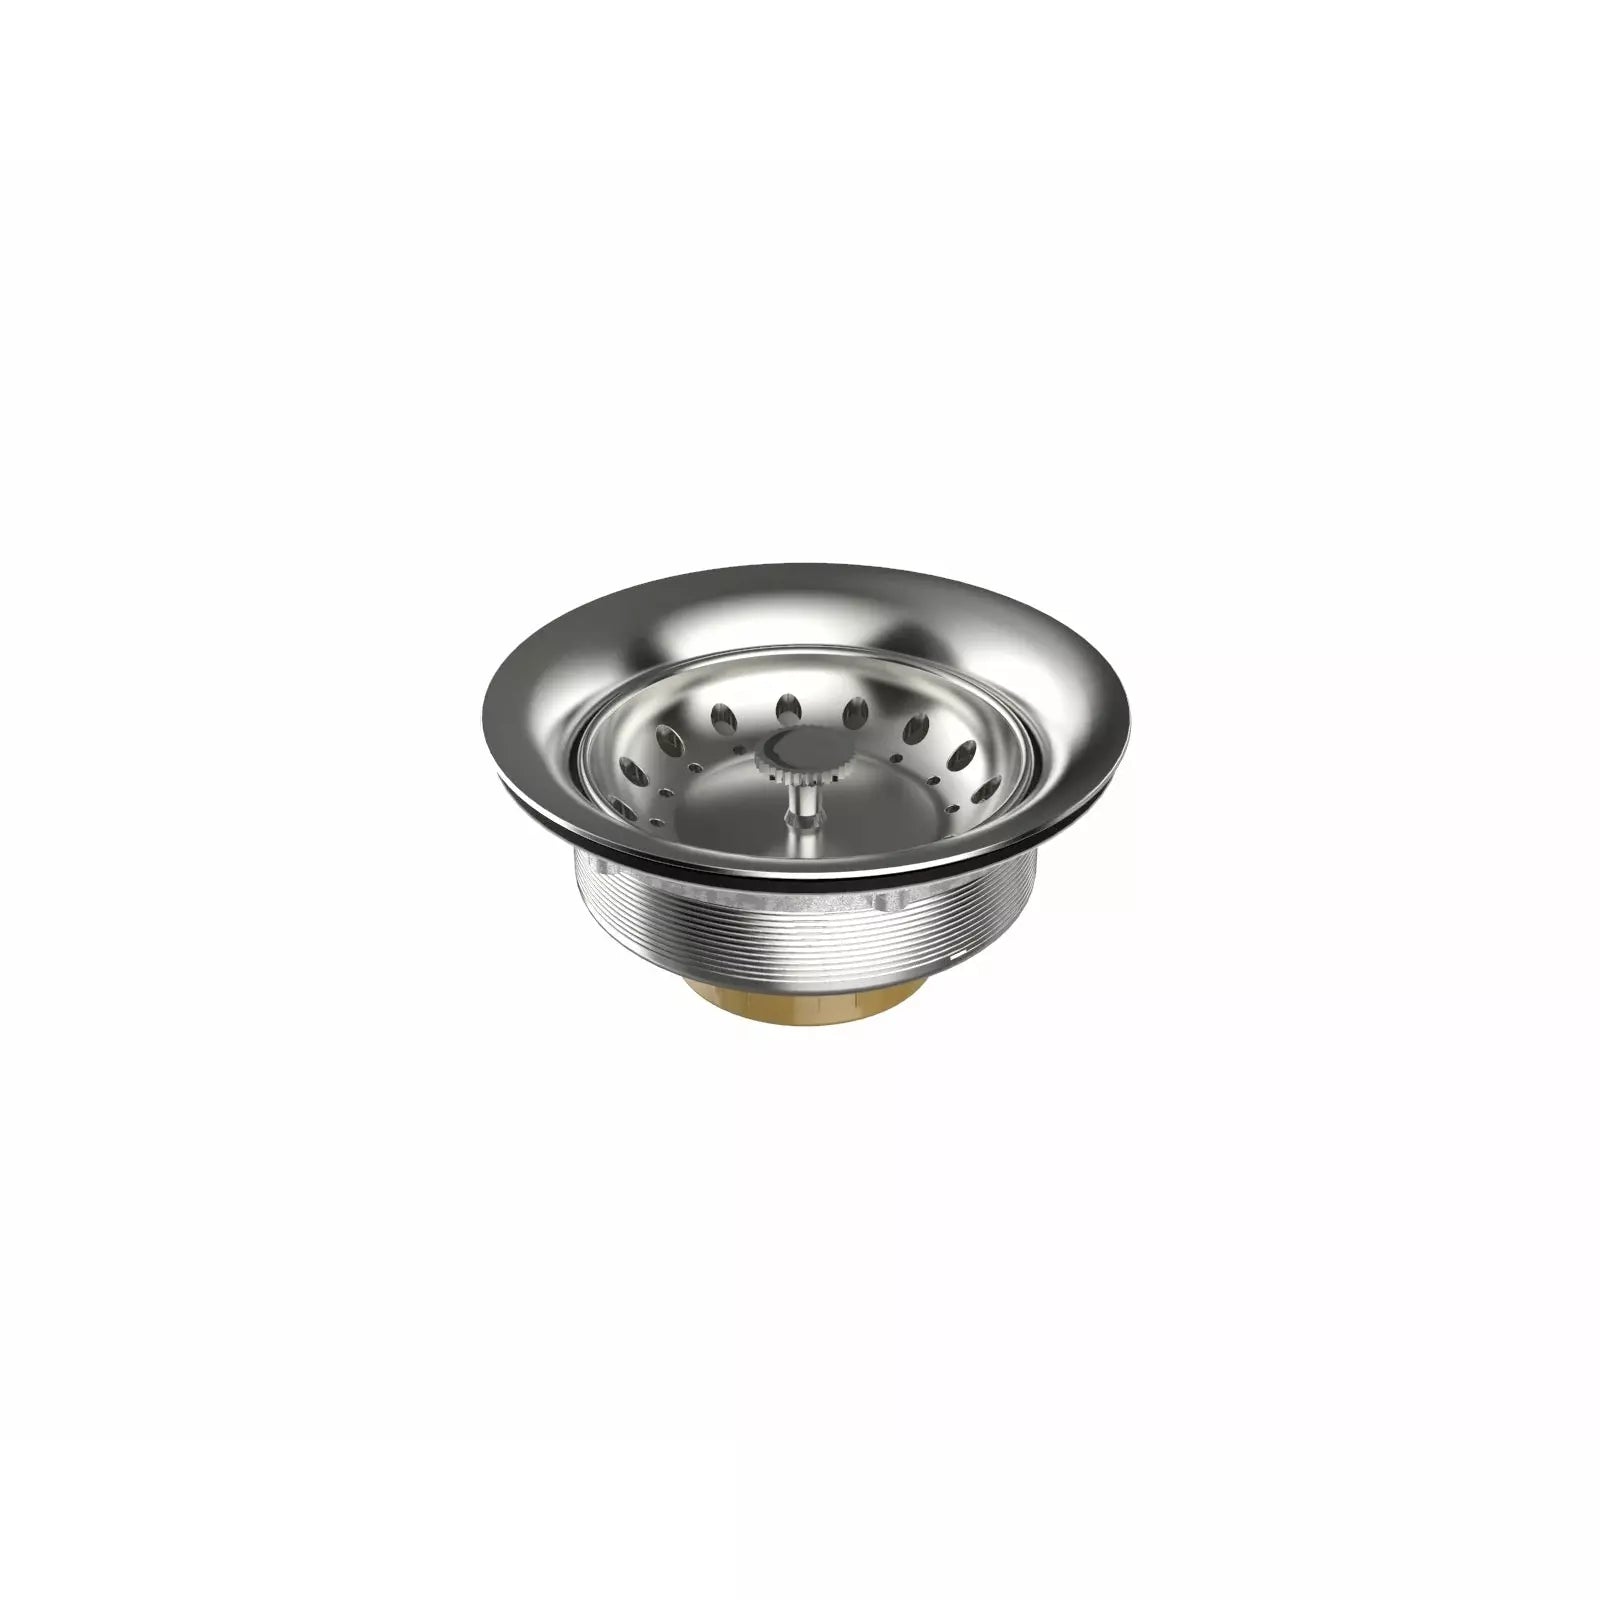 Swiss Madison 4.5" Sink Drain, Polished, Stainless Steel - SM-KD765